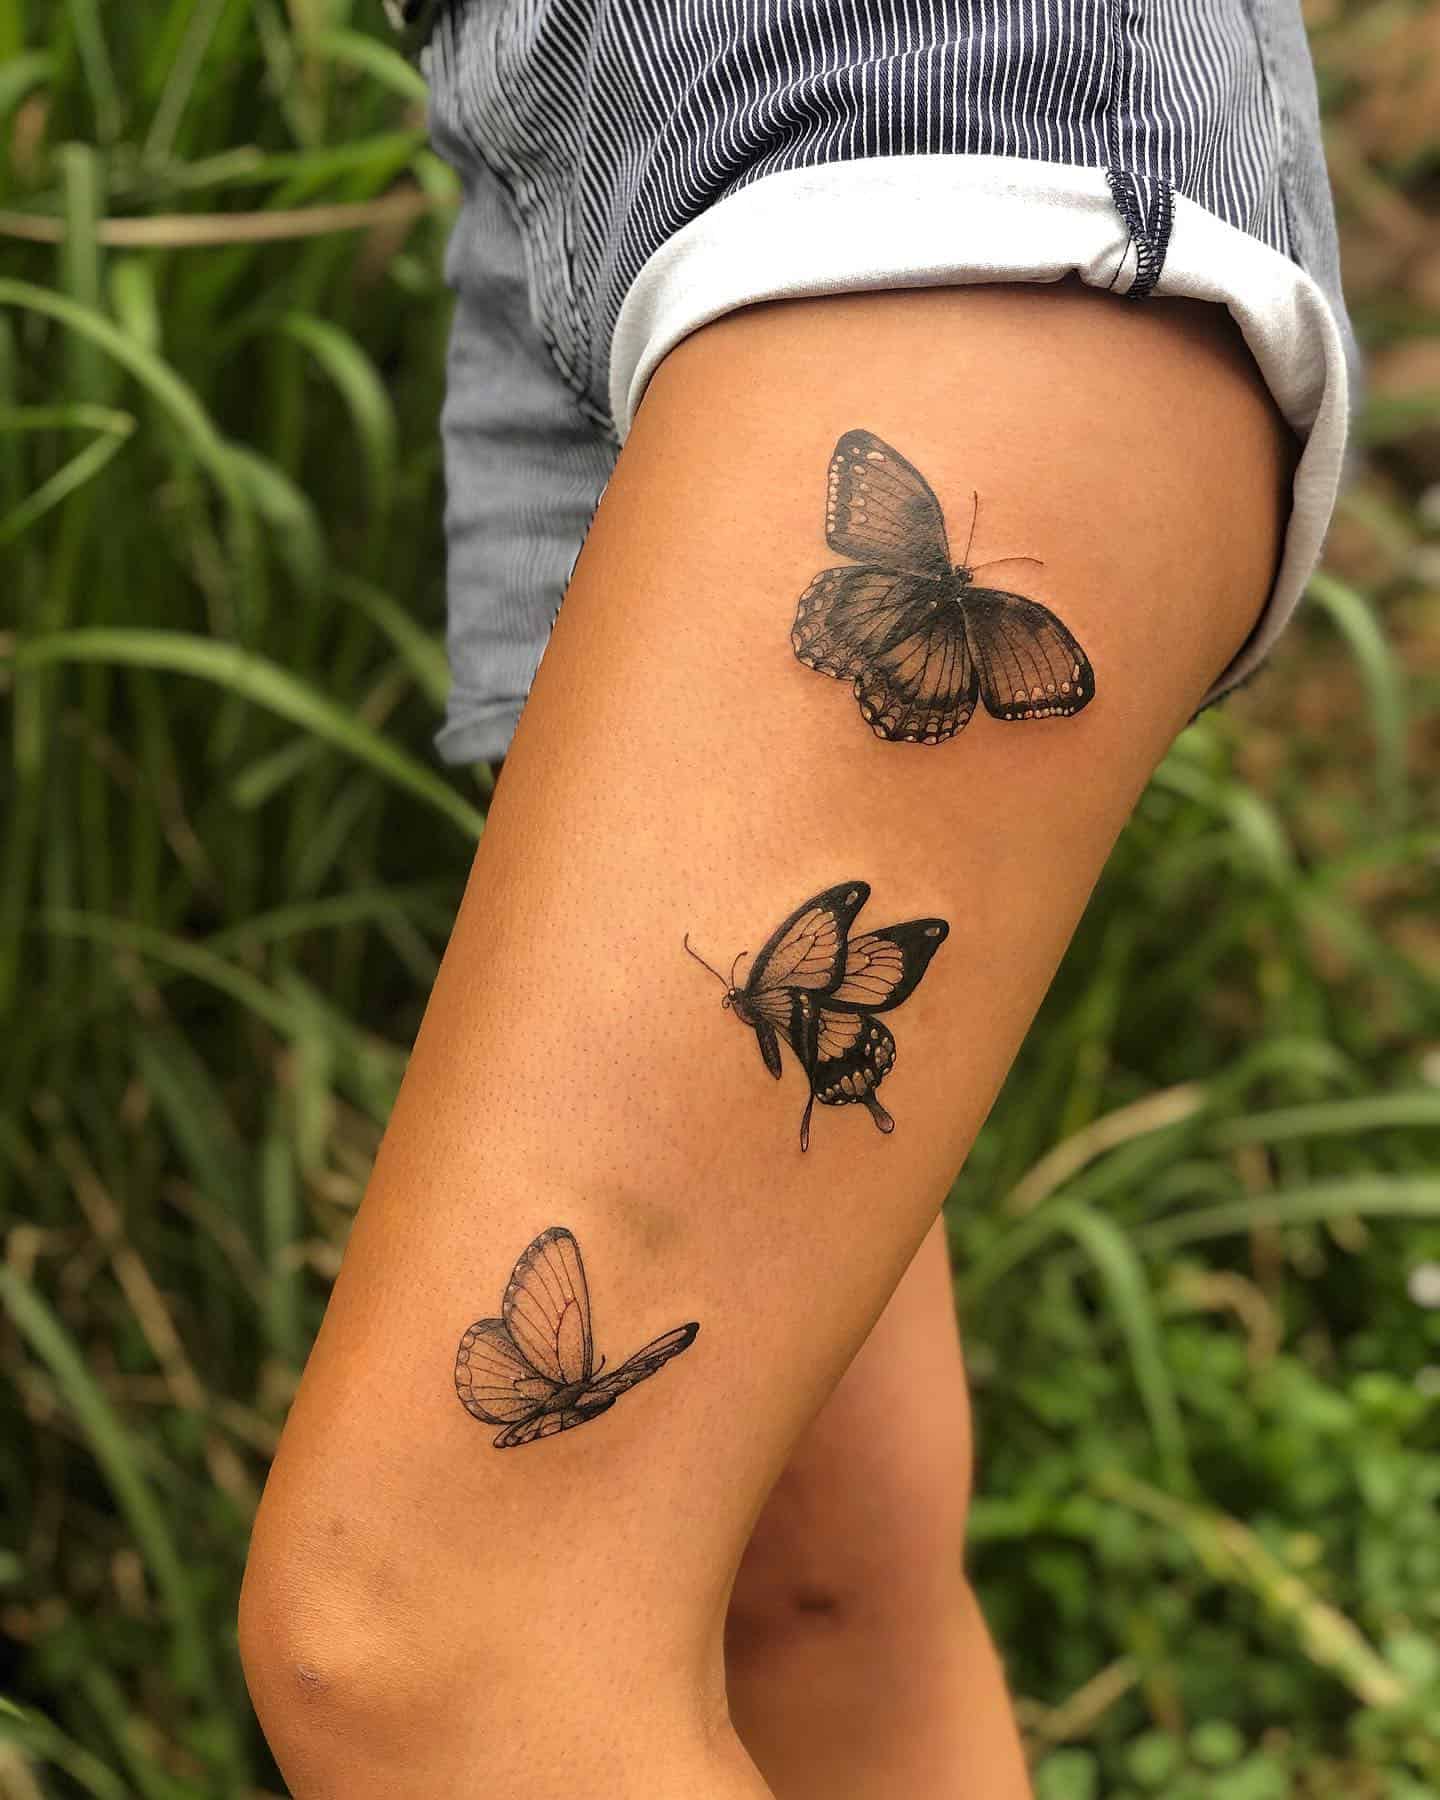 18 Butterfly Tattoo Designs And Images For Girls